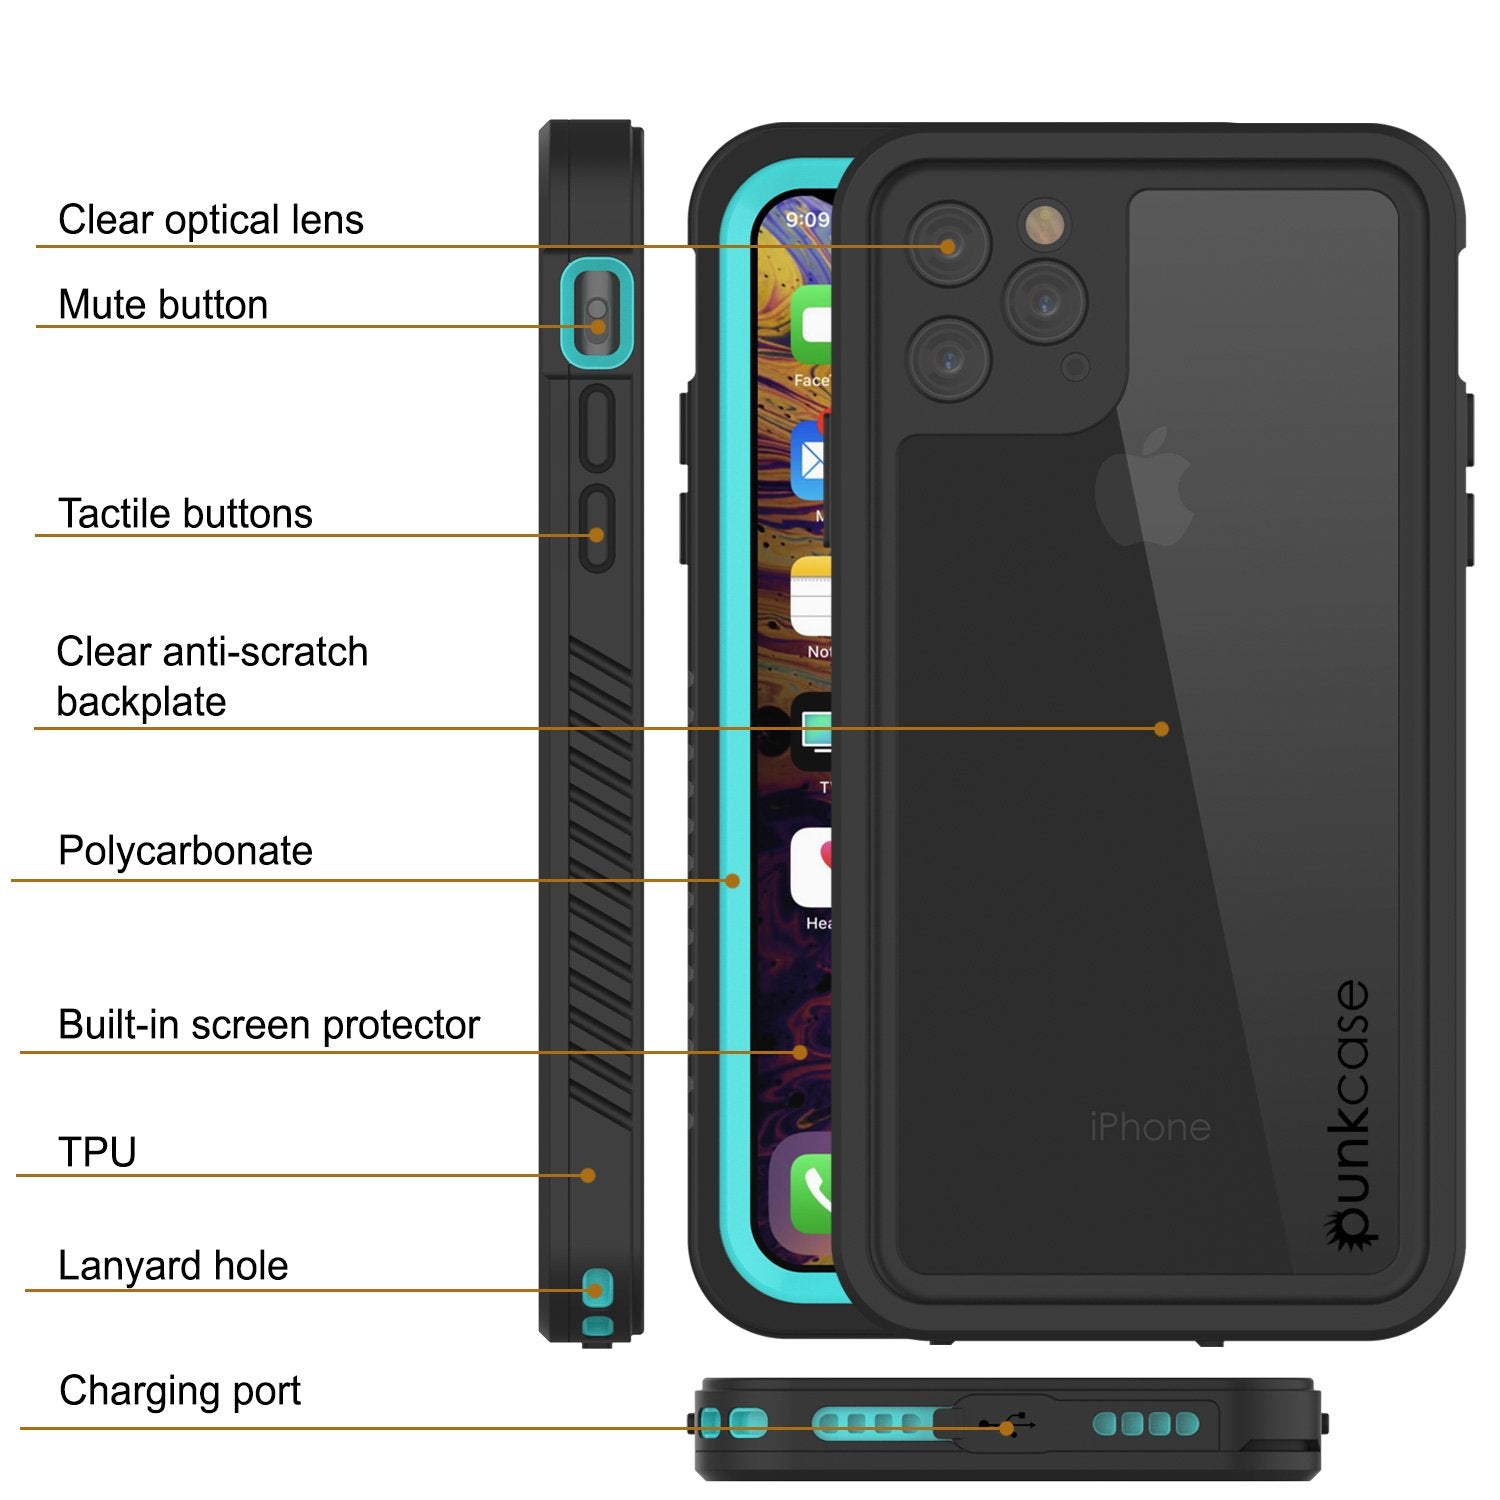 iPhone 11 Pro Max Waterproof Case, Punkcase [Extreme Series] Armor Cover W/ Built In Screen Protector [Teal]